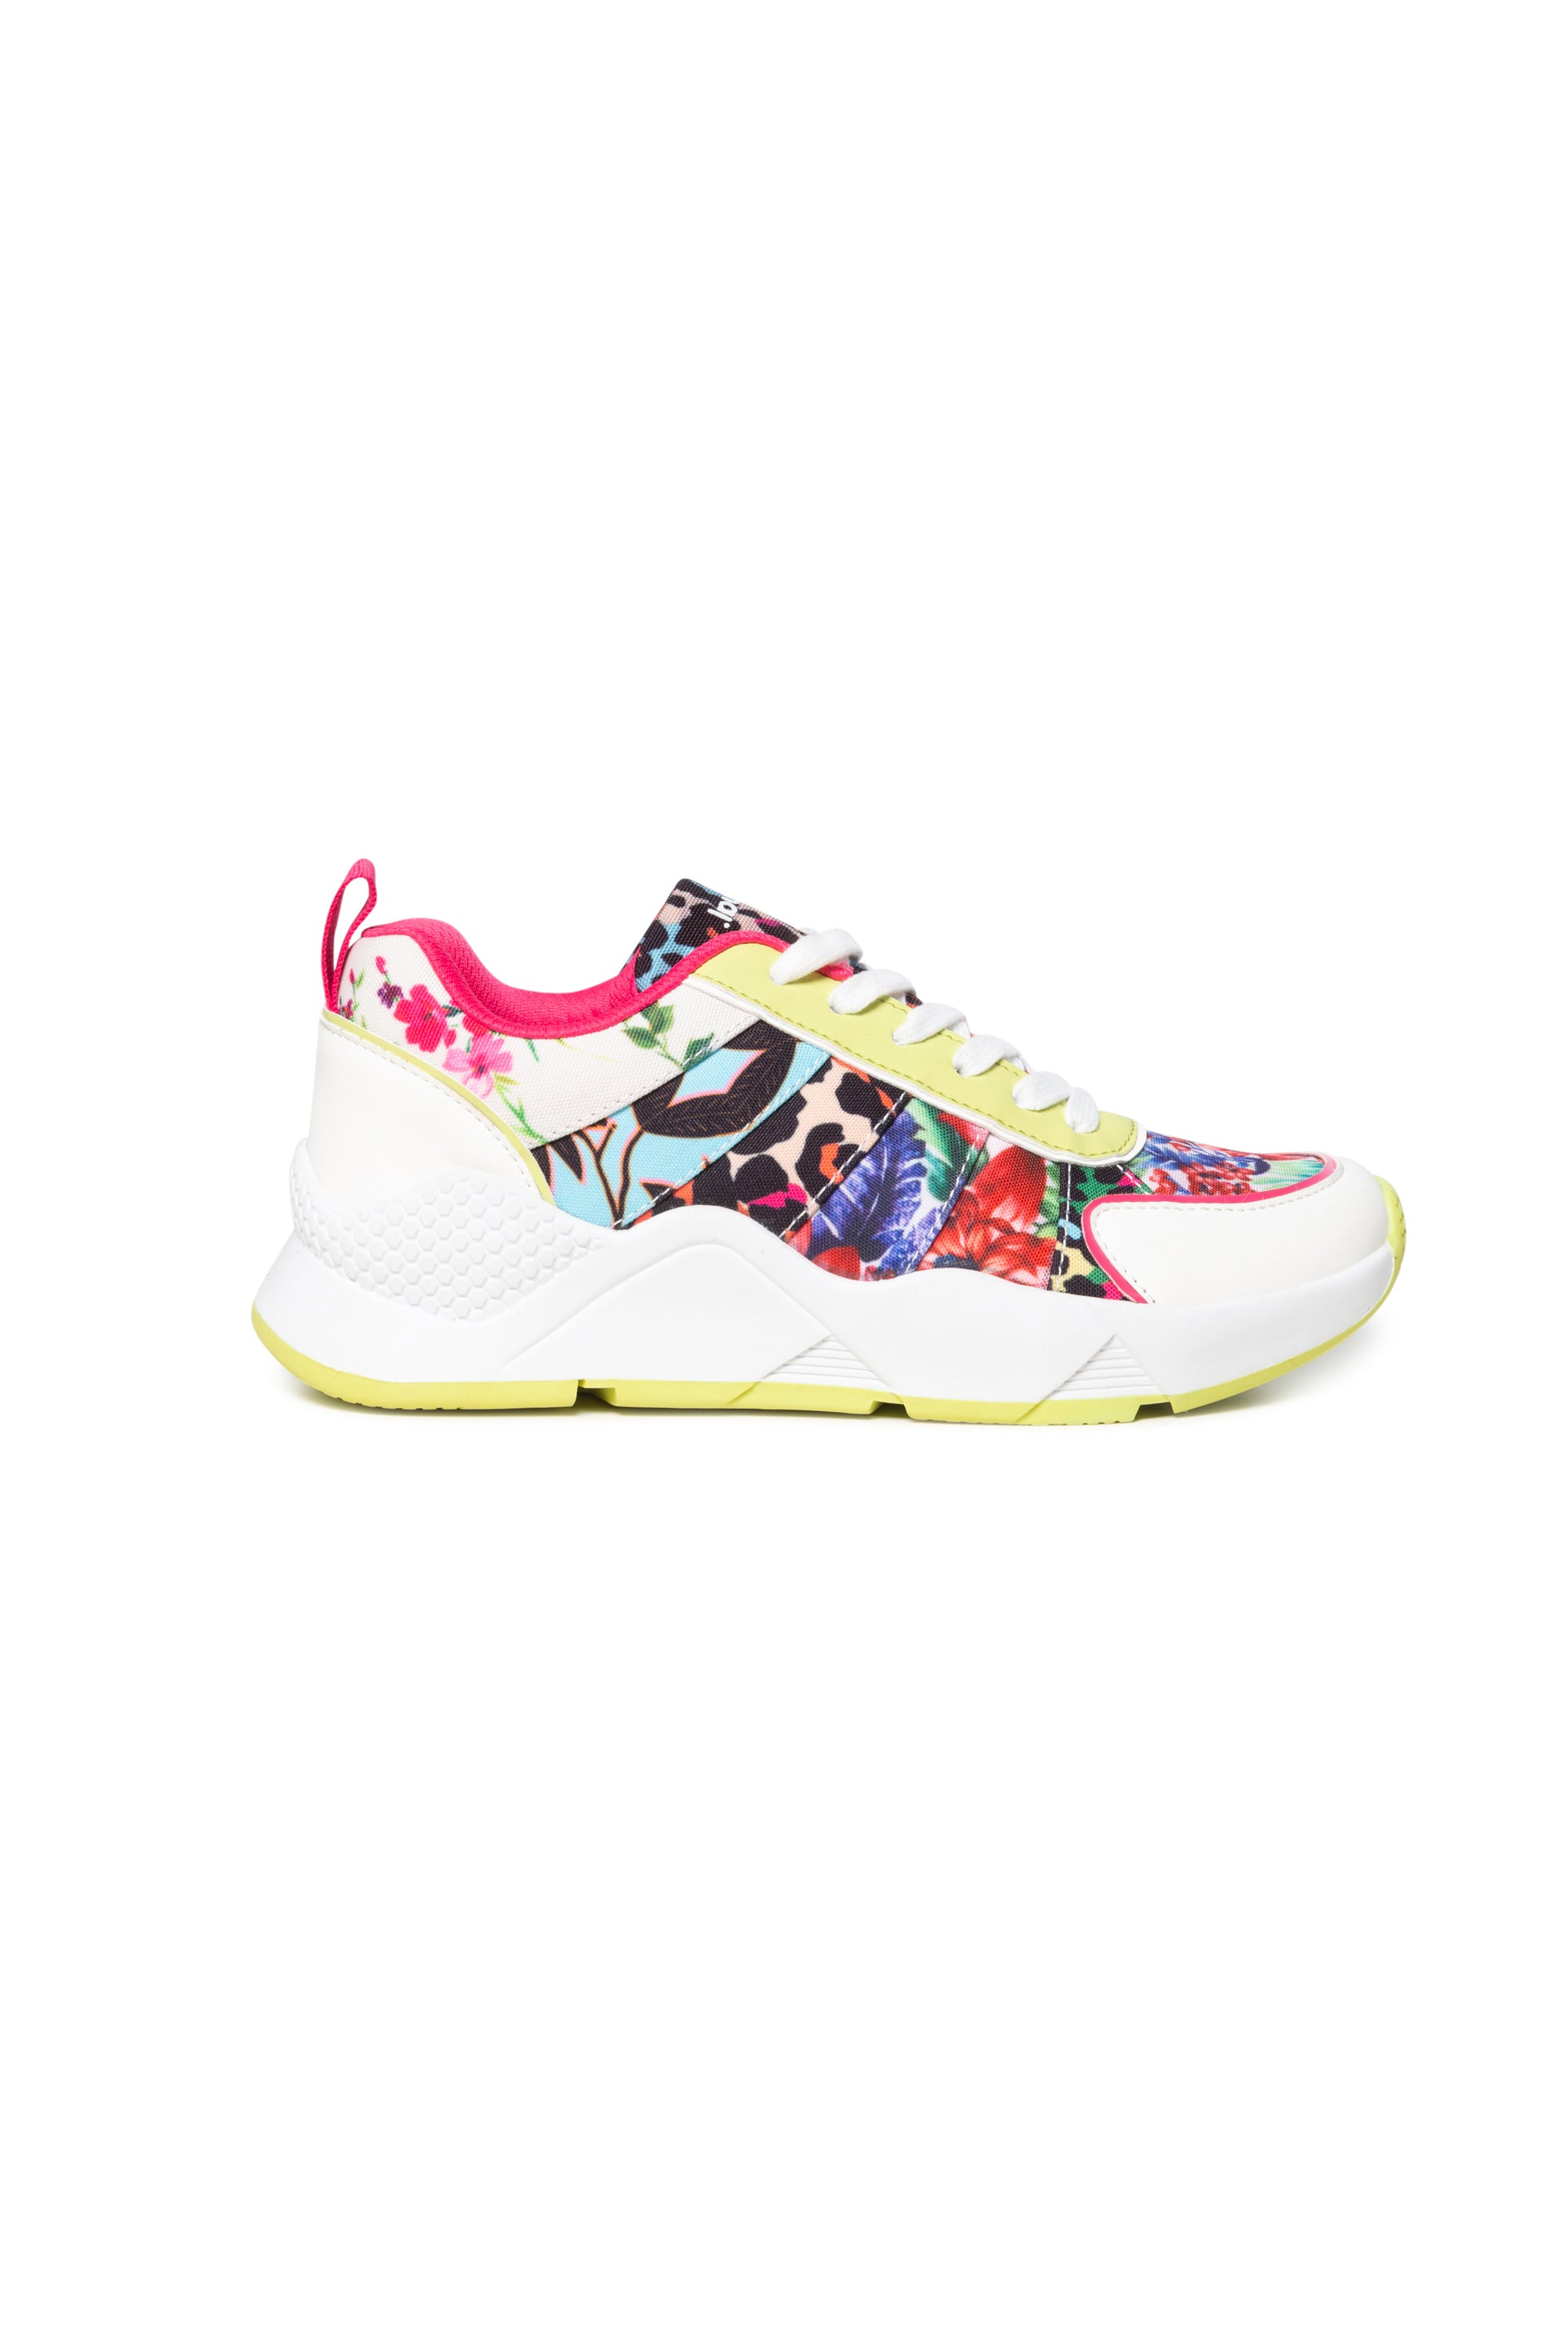 Hydra Leopard Sneakers Pumps with Neon Bright Print Desigual Style 20S ...